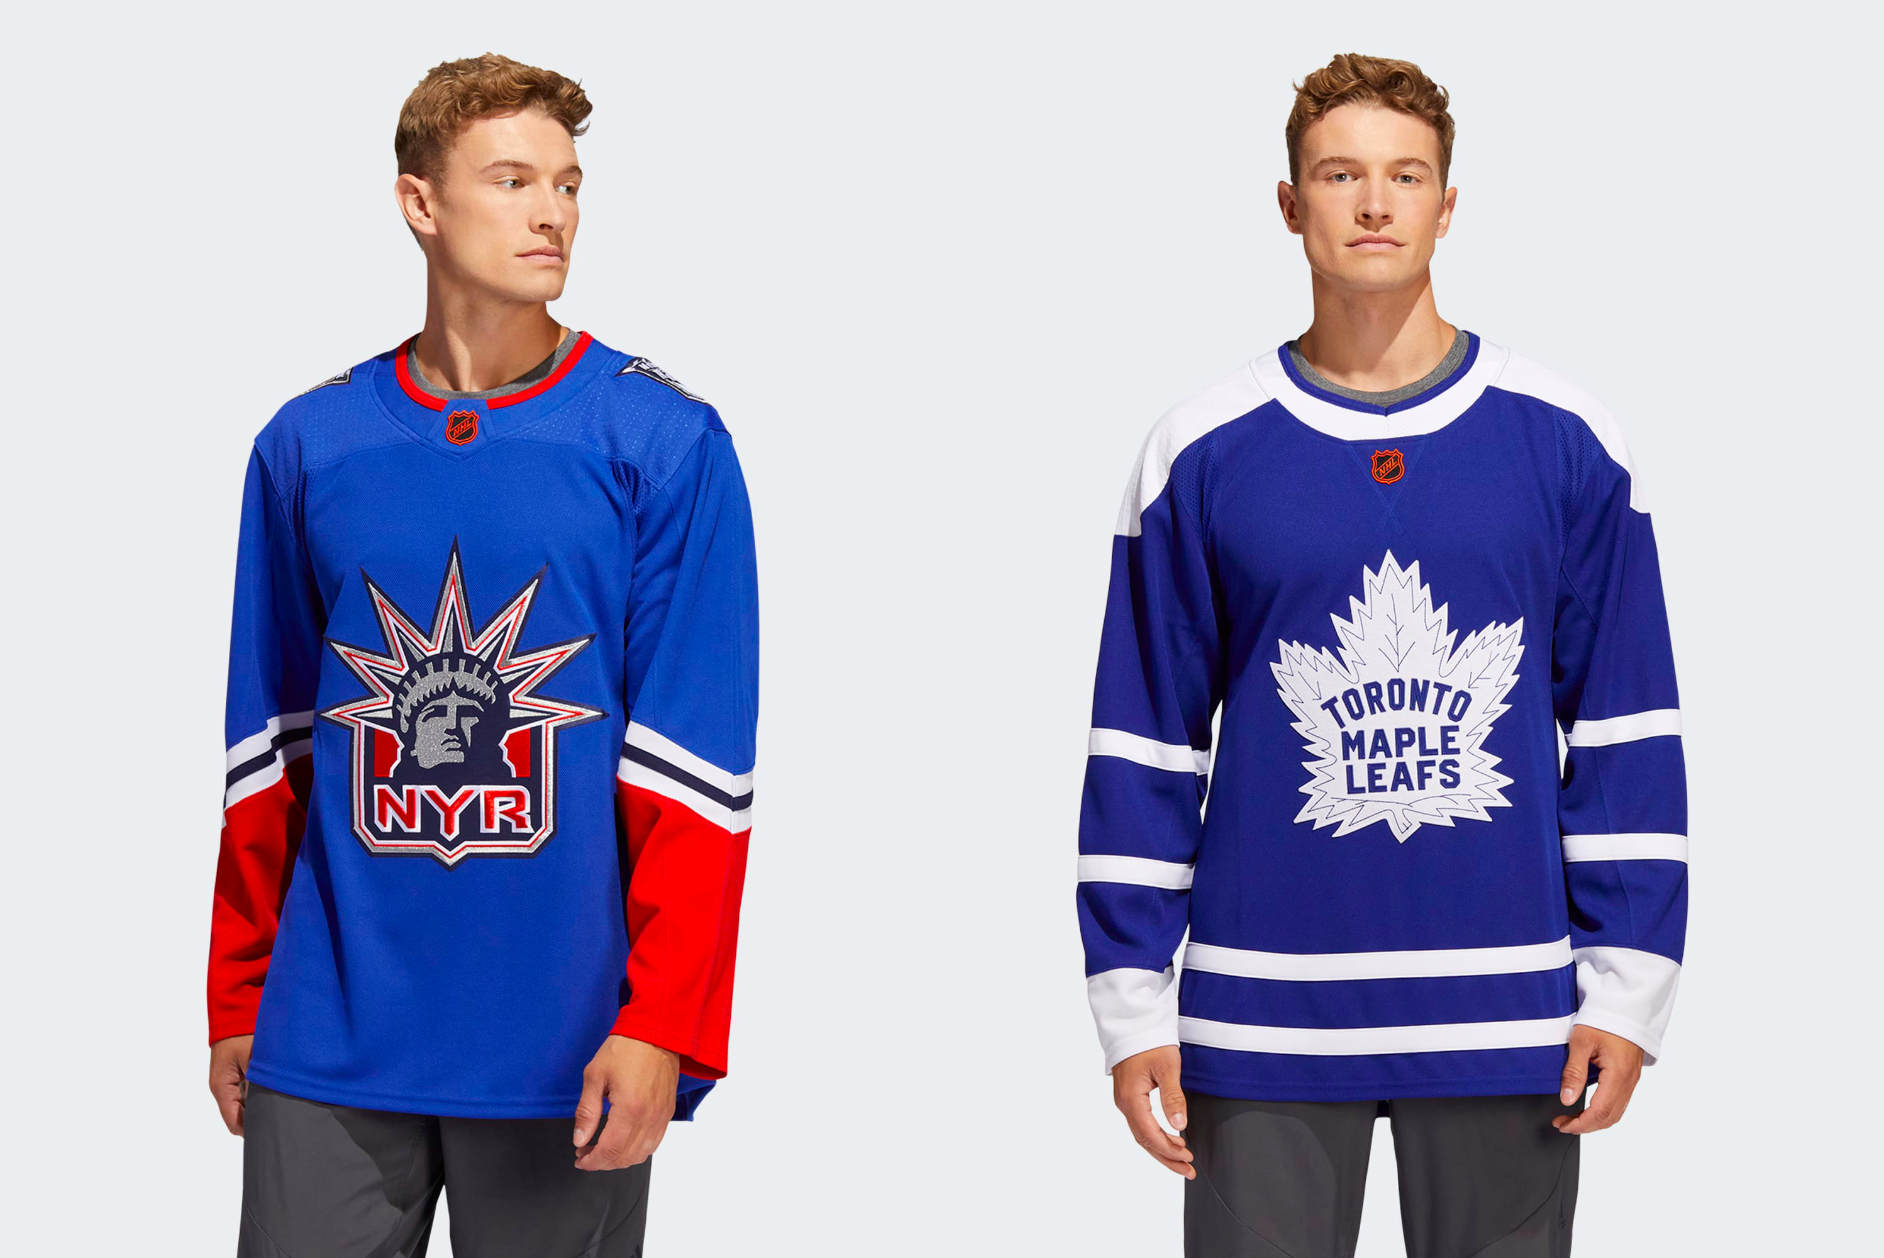 Leafs release new-look reverse retro jerseys for this season (PHOTOS)